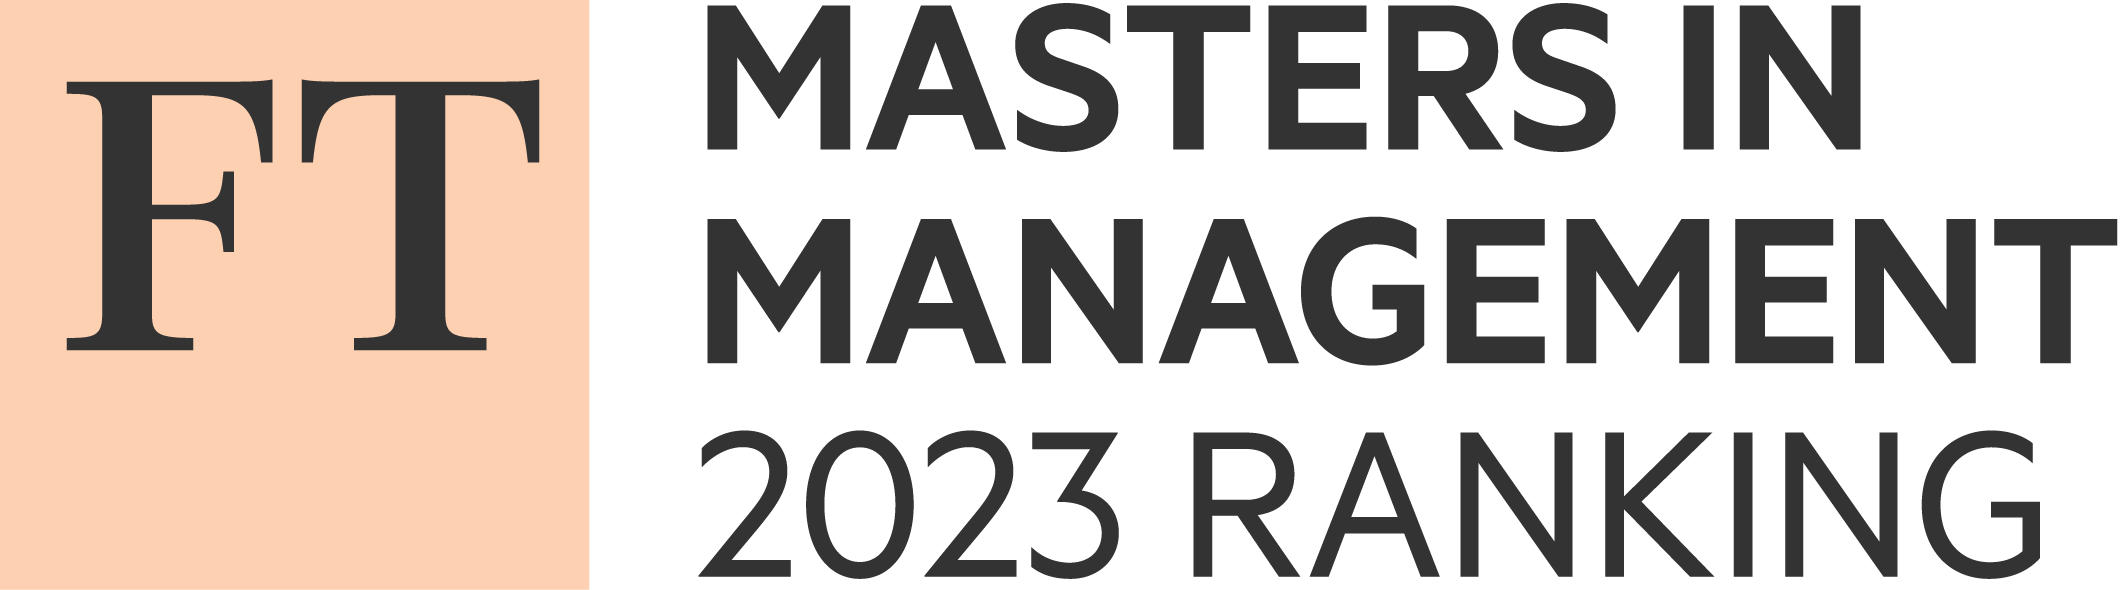 FT_RANKINGS_2023__MASTERS_IN_MANAGEMENT_RGB.png